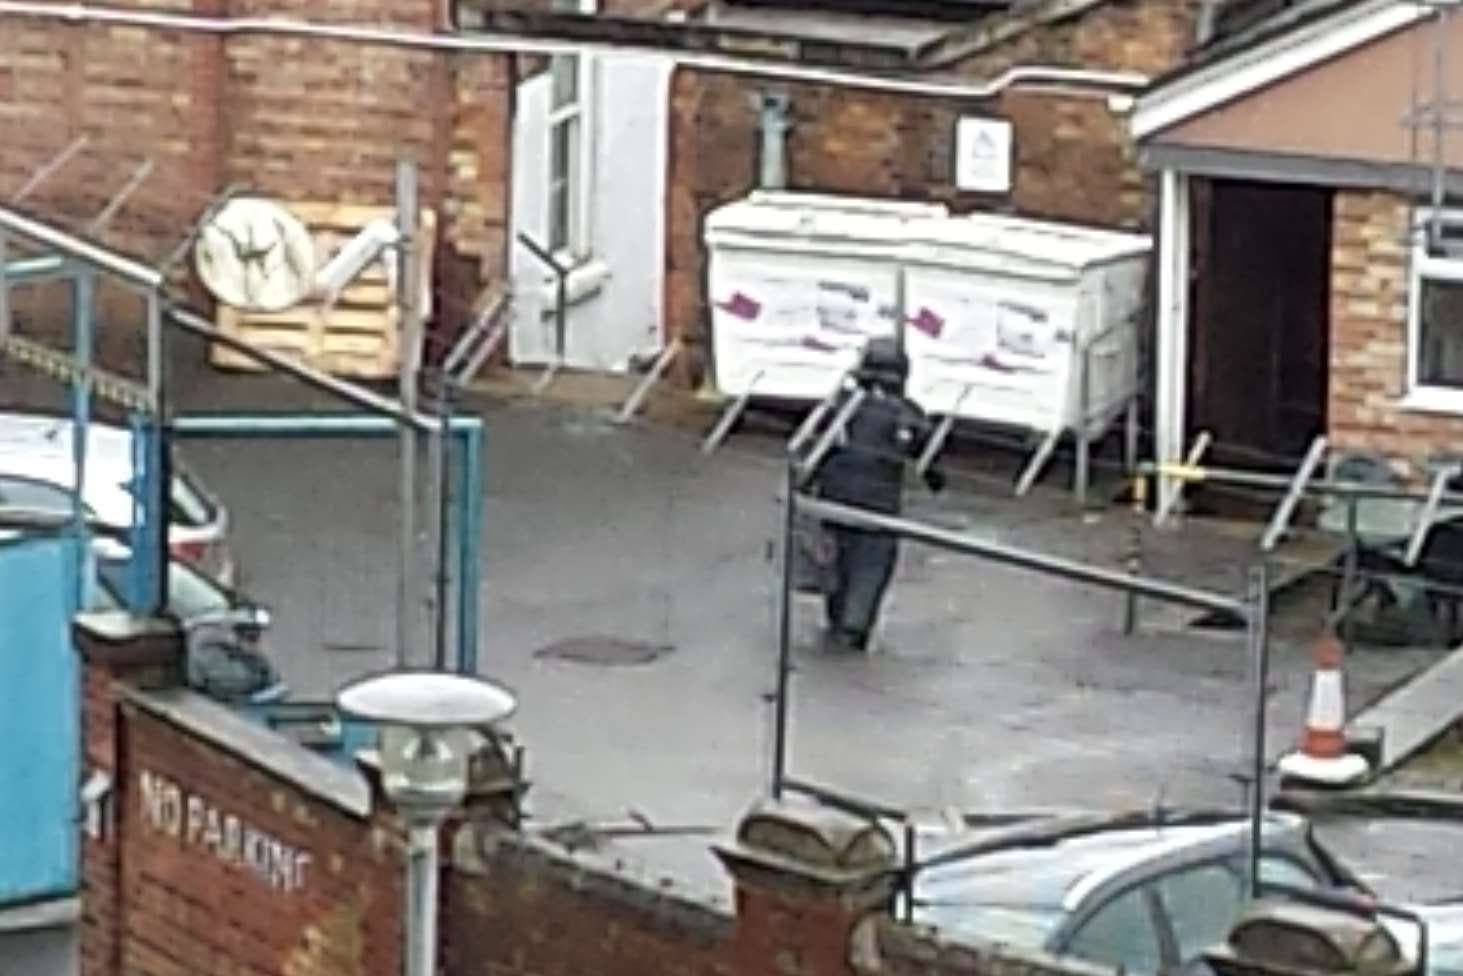 A bomb disposal expert enters the building in Chatham. Picture: Suzanne Williams